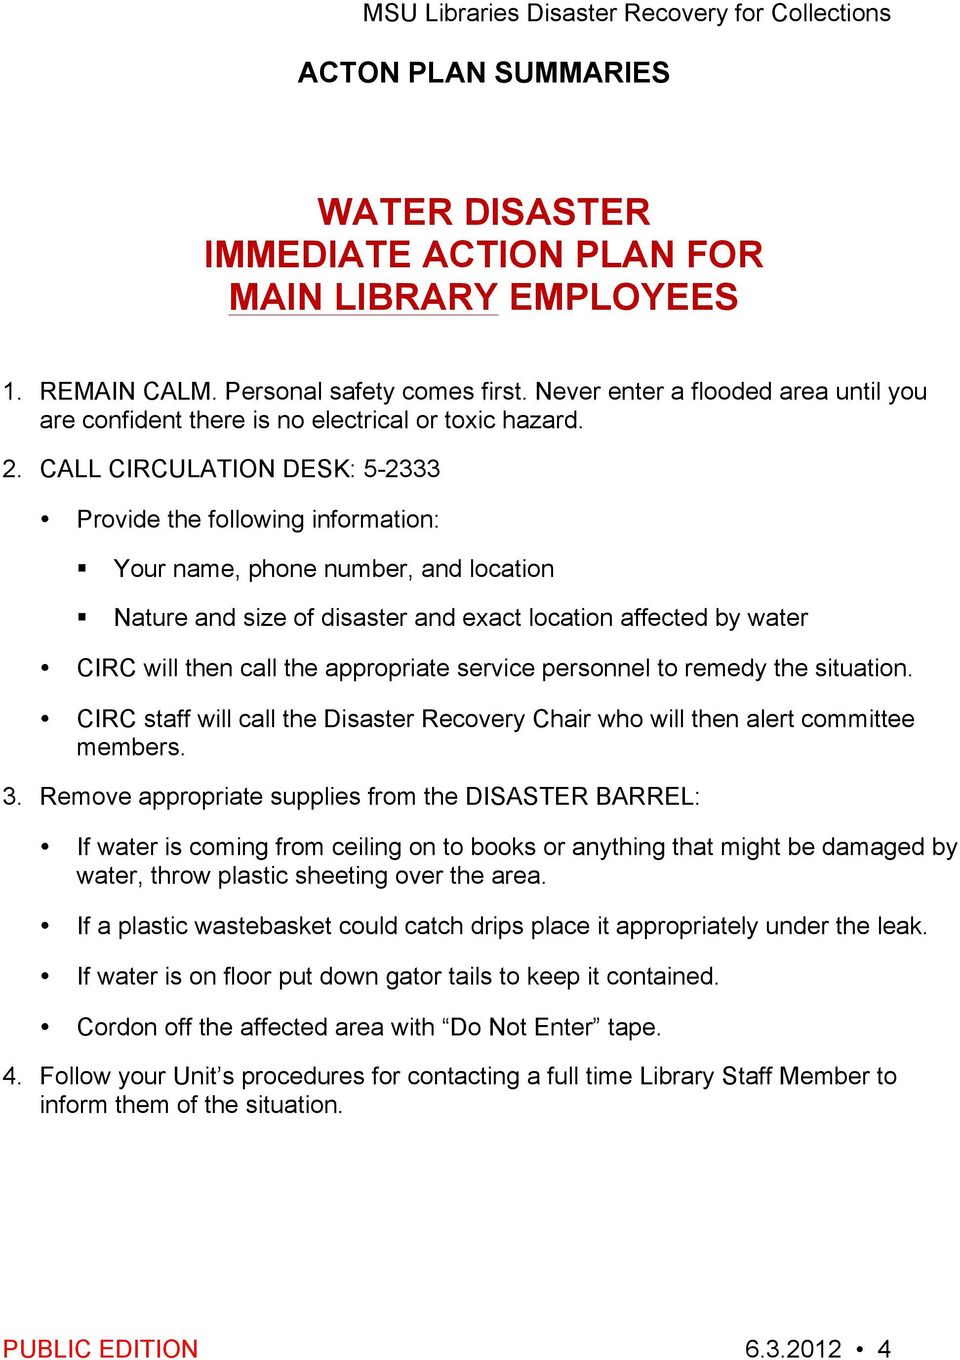 CALL CIRCULATION DESK: 5-2333 Provide the following information: Your name, phone number, and location Nature and size of disaster and exact location affected by water CIRC will then call the